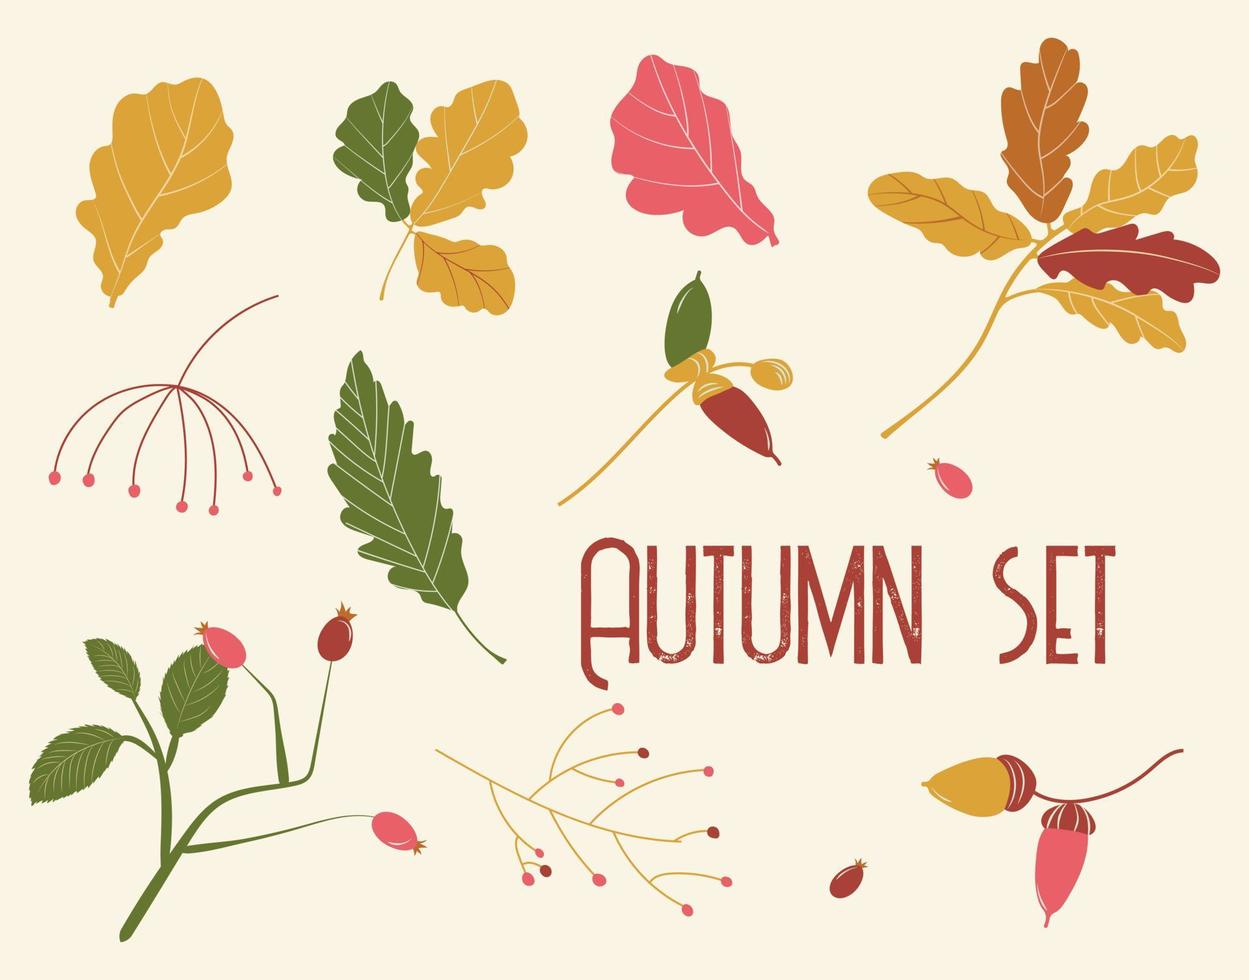 Autumn Leaf Set. Vector illustration of leaves, berries and acorns in orange and pink. Drawings of fall plants for a print or advertisement.